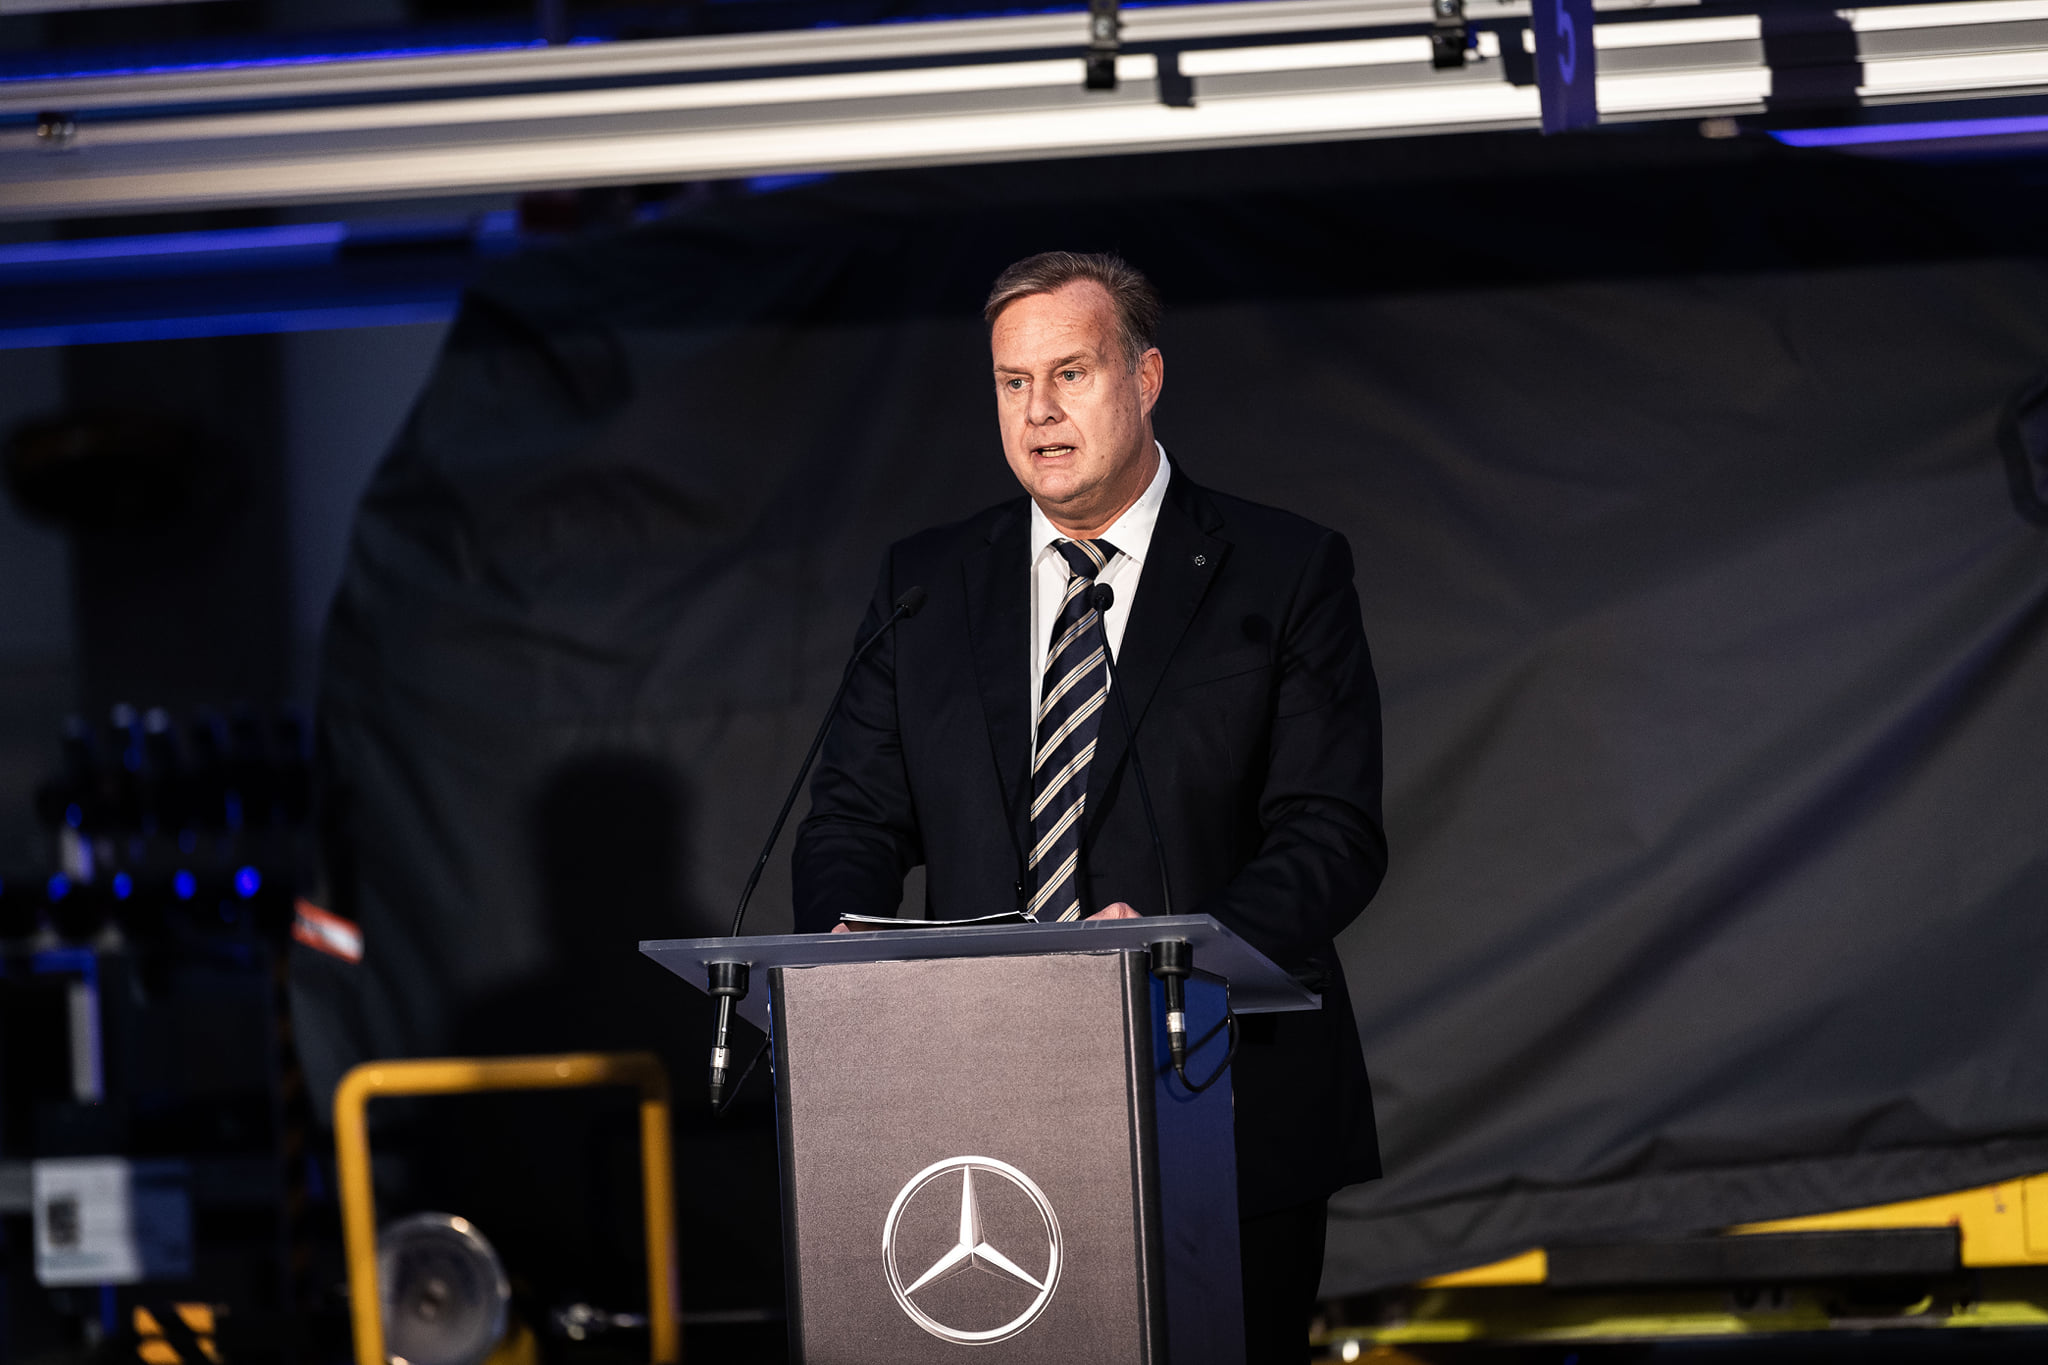 Christian Wolff, CEO of Mercedes-Benz Manufacturing Hungary